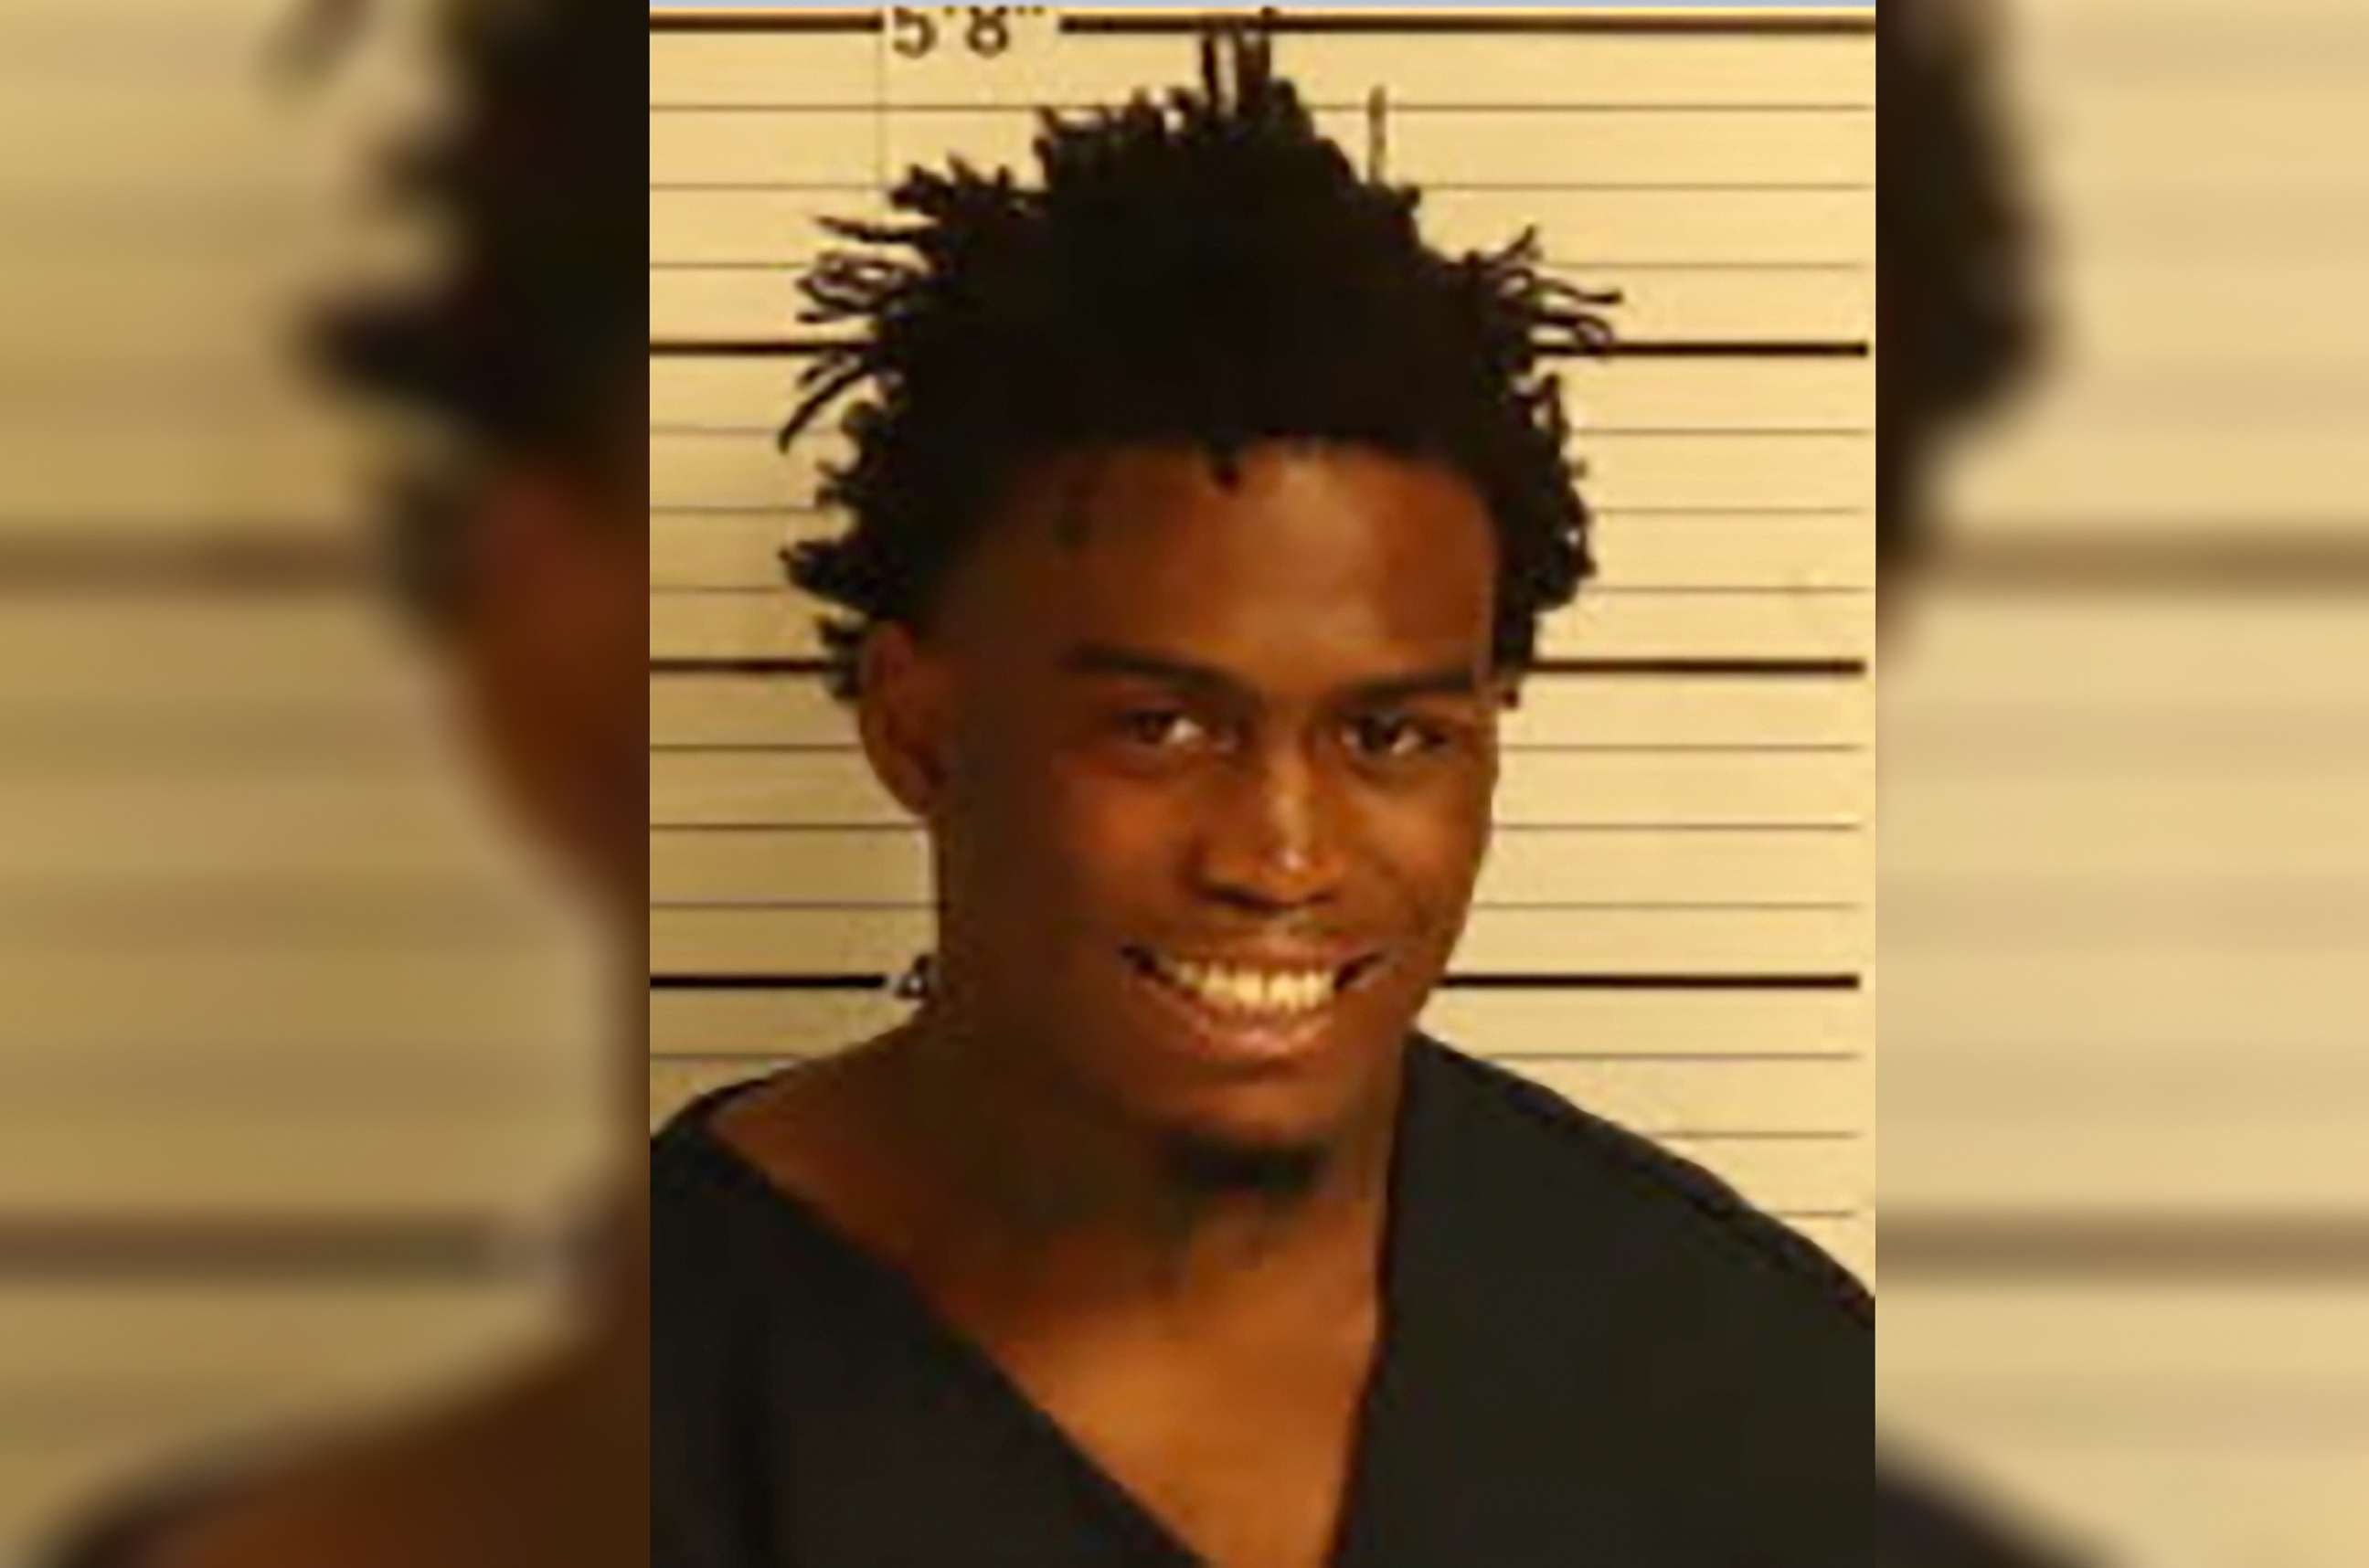 PHOTO: Memphis police announced that 19-year-old Ezekiel Dujuan Kelly allegedly killed four people and injured three others during an hour-long shooting rampage across Memphis on Sept. 7, 2022.